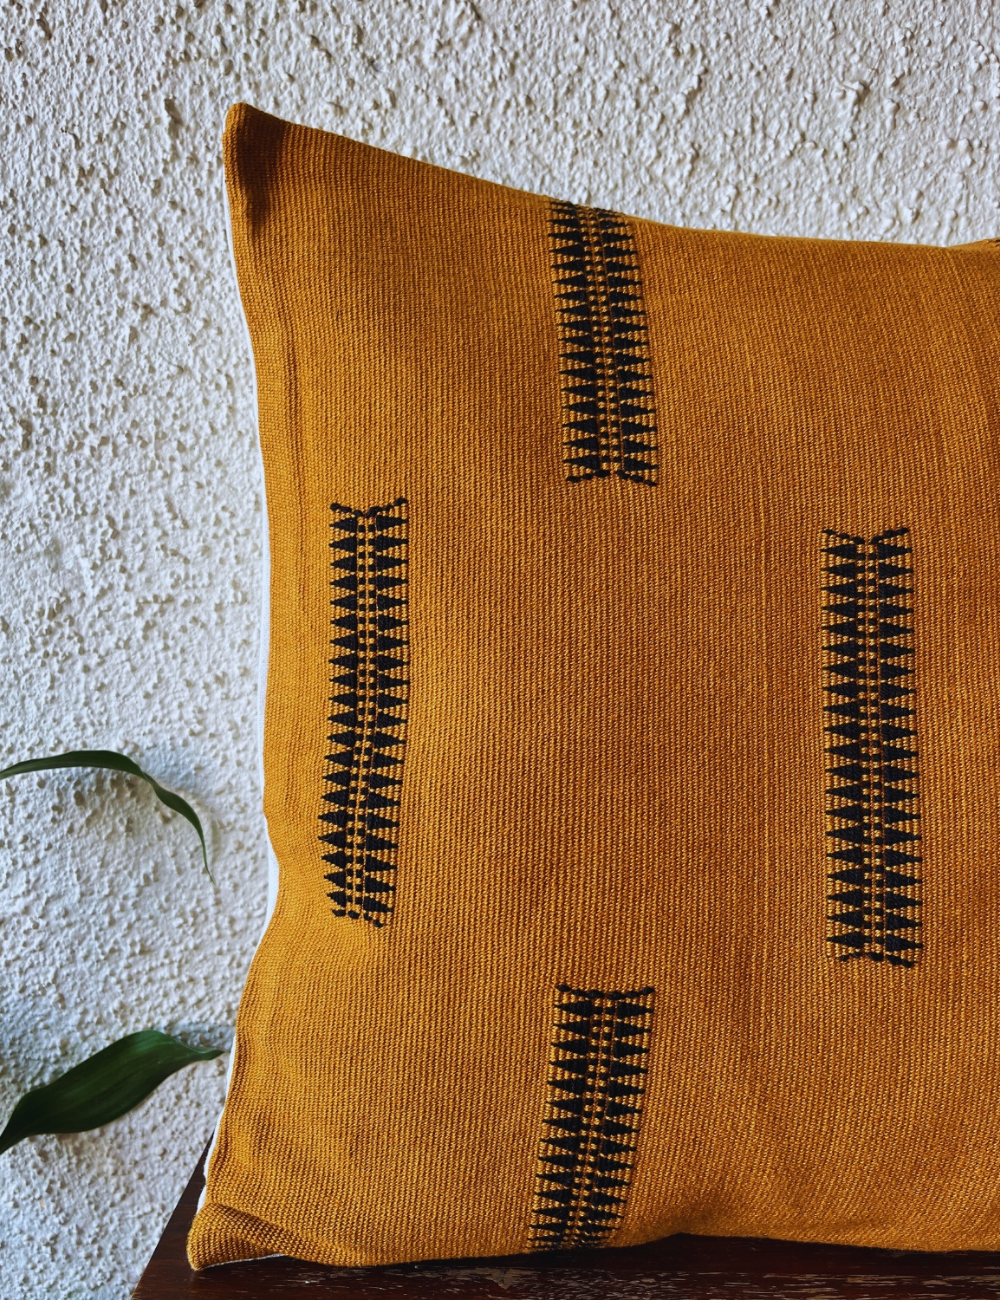 Chizami Weaves - Loin Loom Handwoven Cushion Cover Set in Dark Mustard with Black Motif (Set of 2)